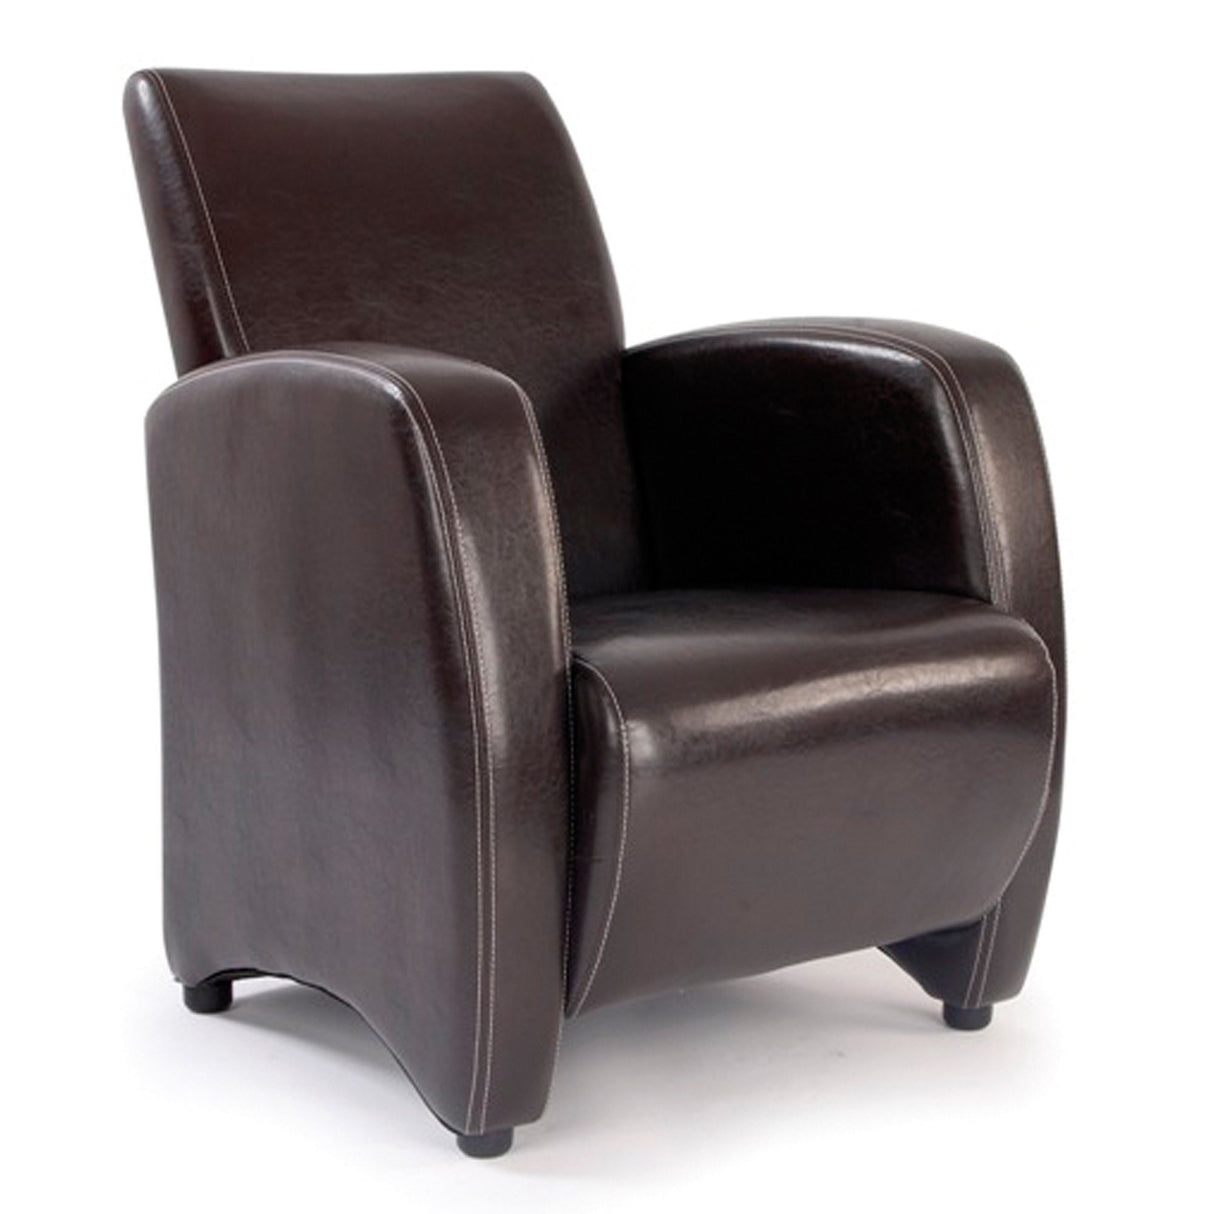 Nautilus Designs Metro  High Back Lounge Armchair Upholstered in a Durable Leather Effect Finish - Brown